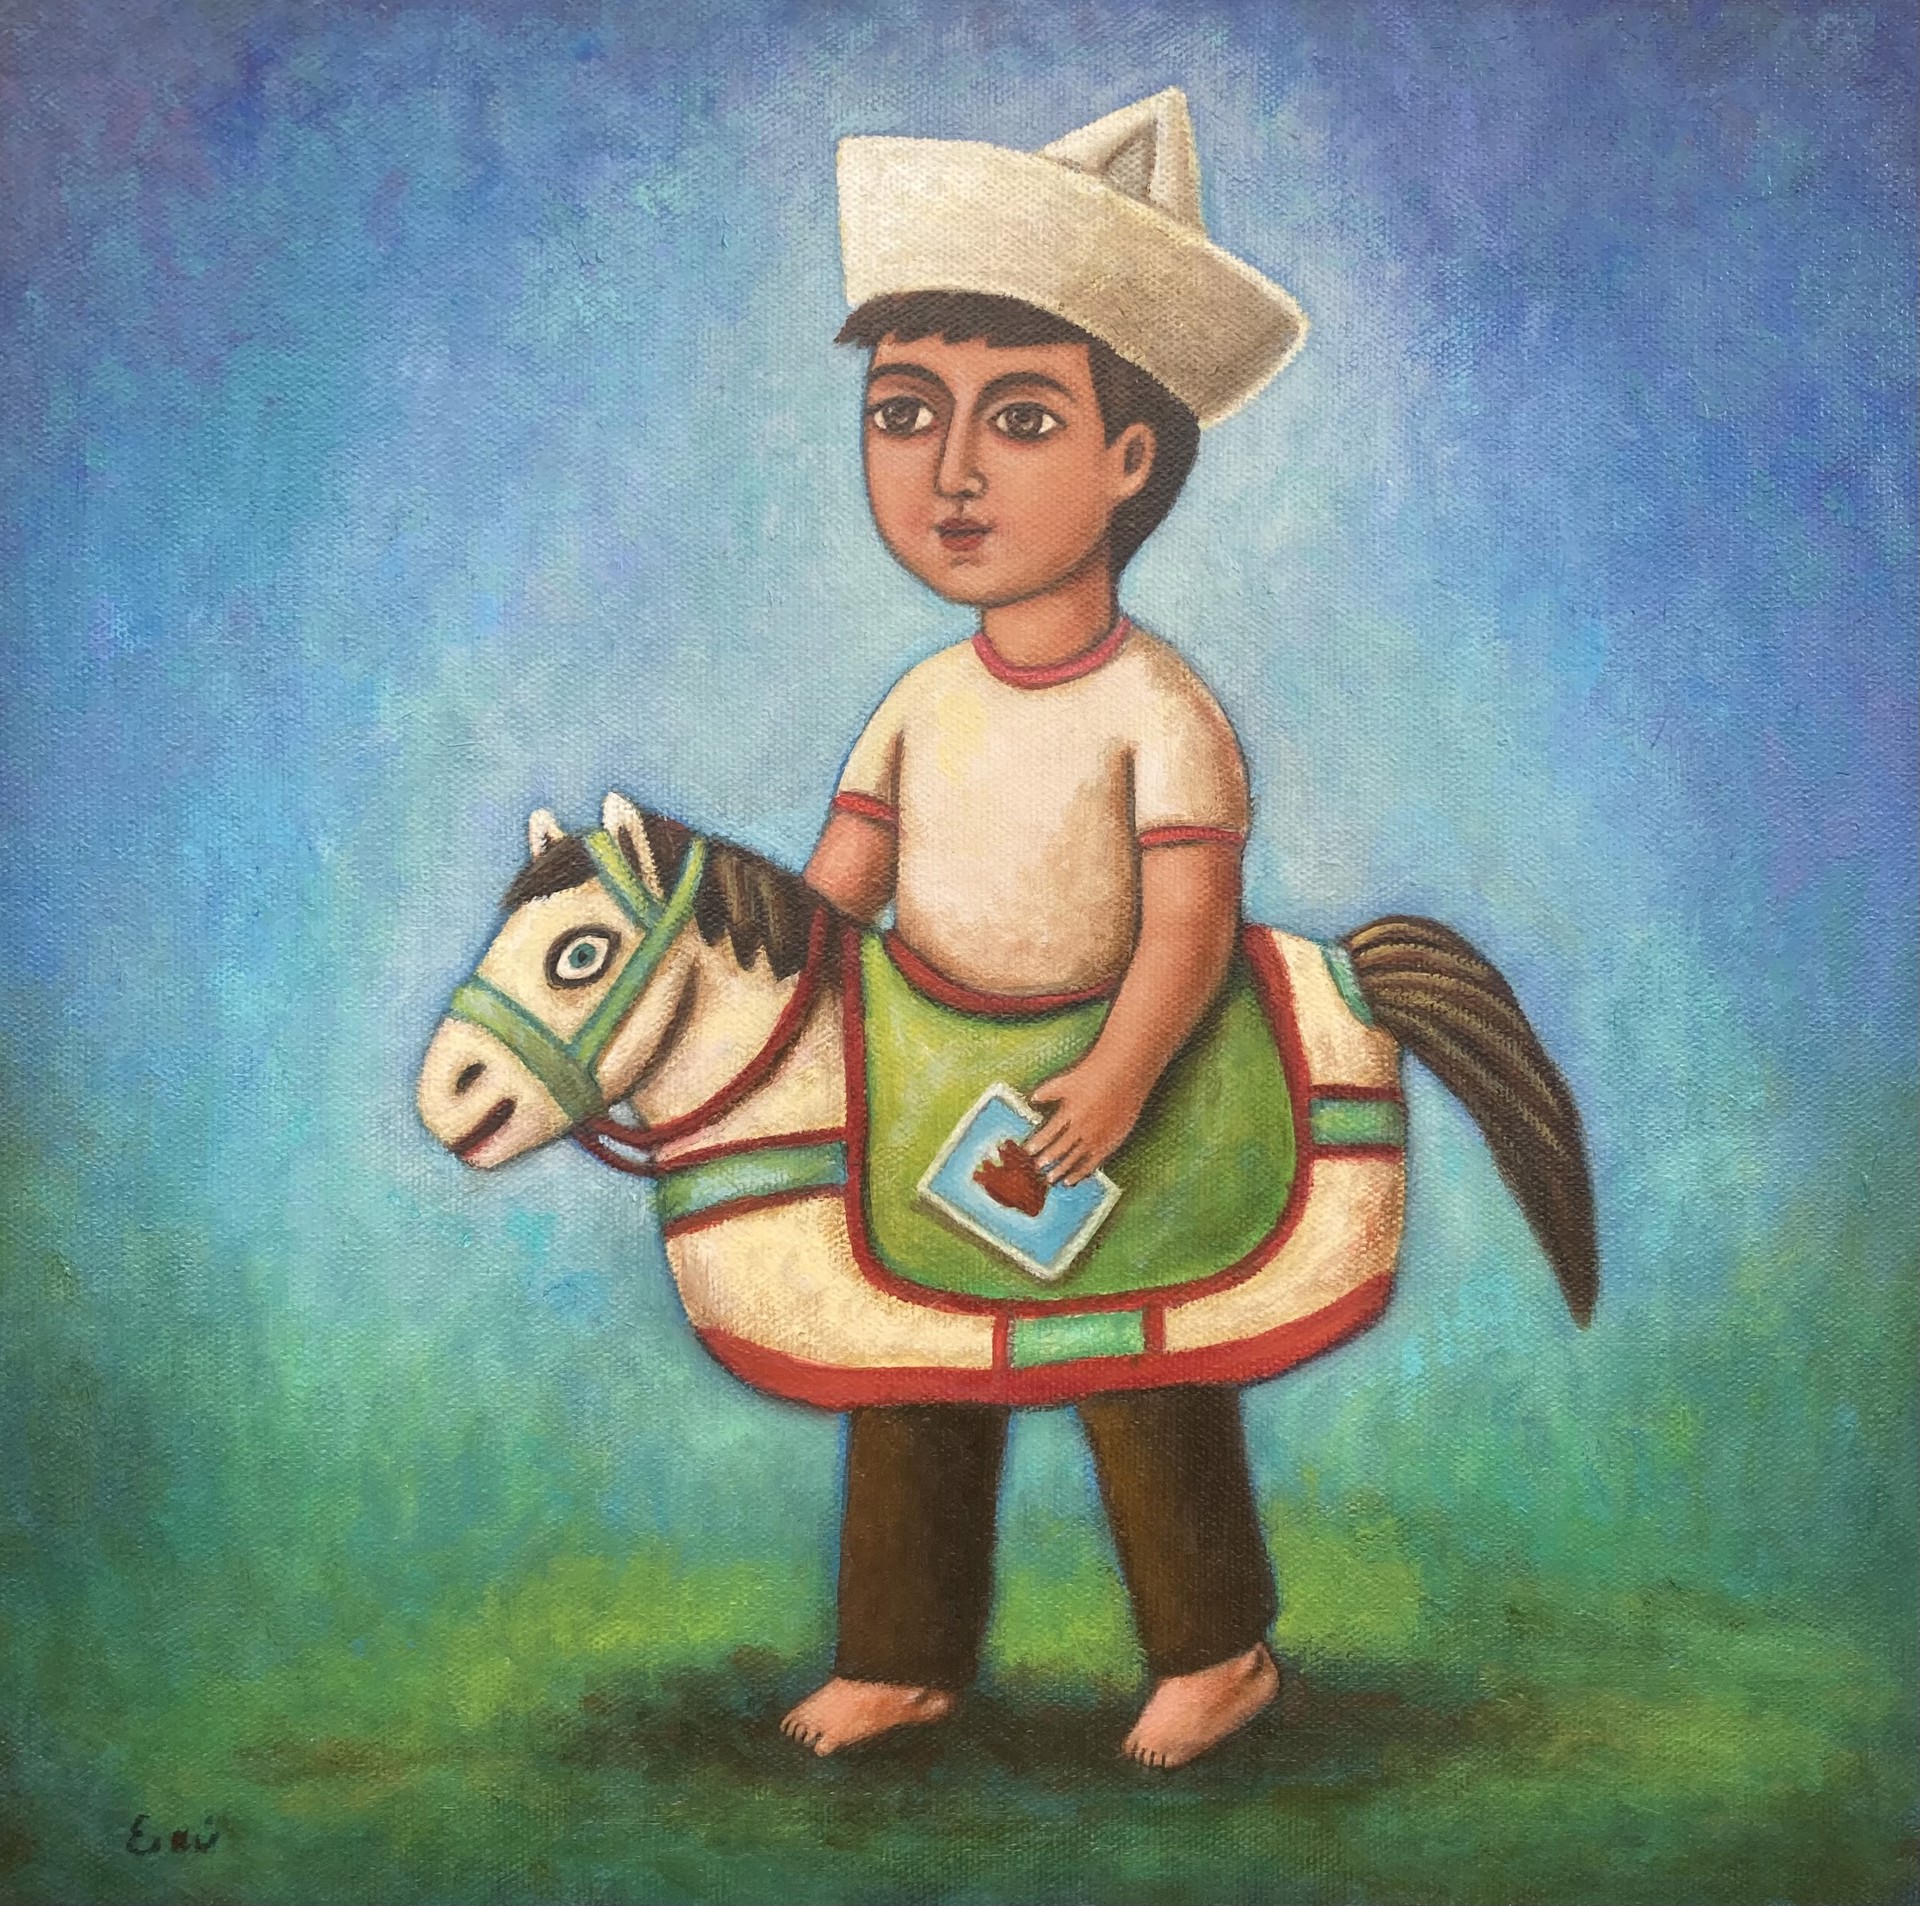 Playing with Horse by Esau Andrade